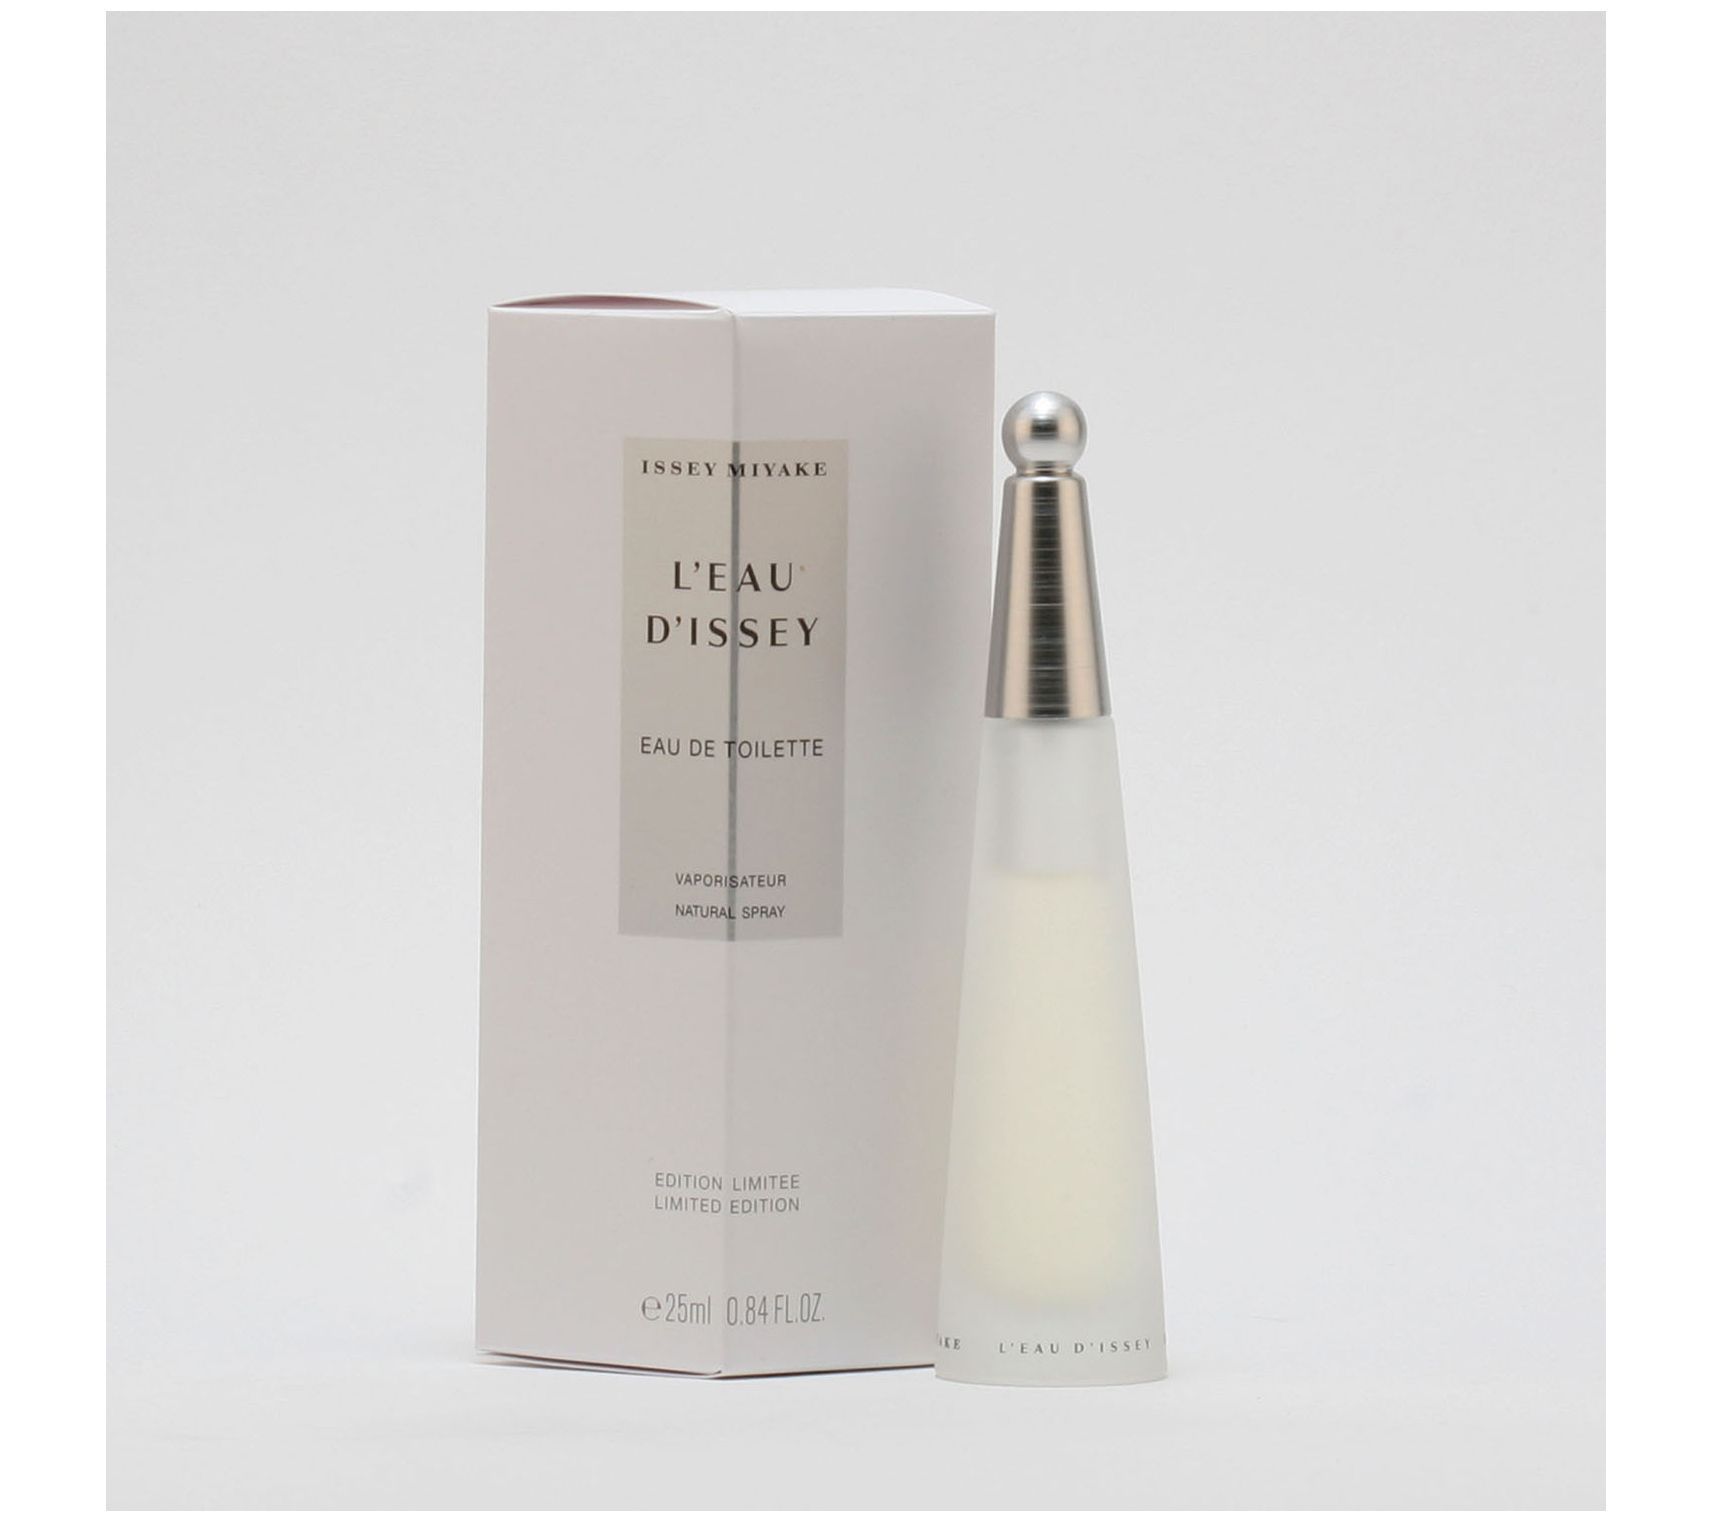 L'Eau D'Issey by Issey Miyake For Women EDT Spr ay 0.85 oz - QVC.com